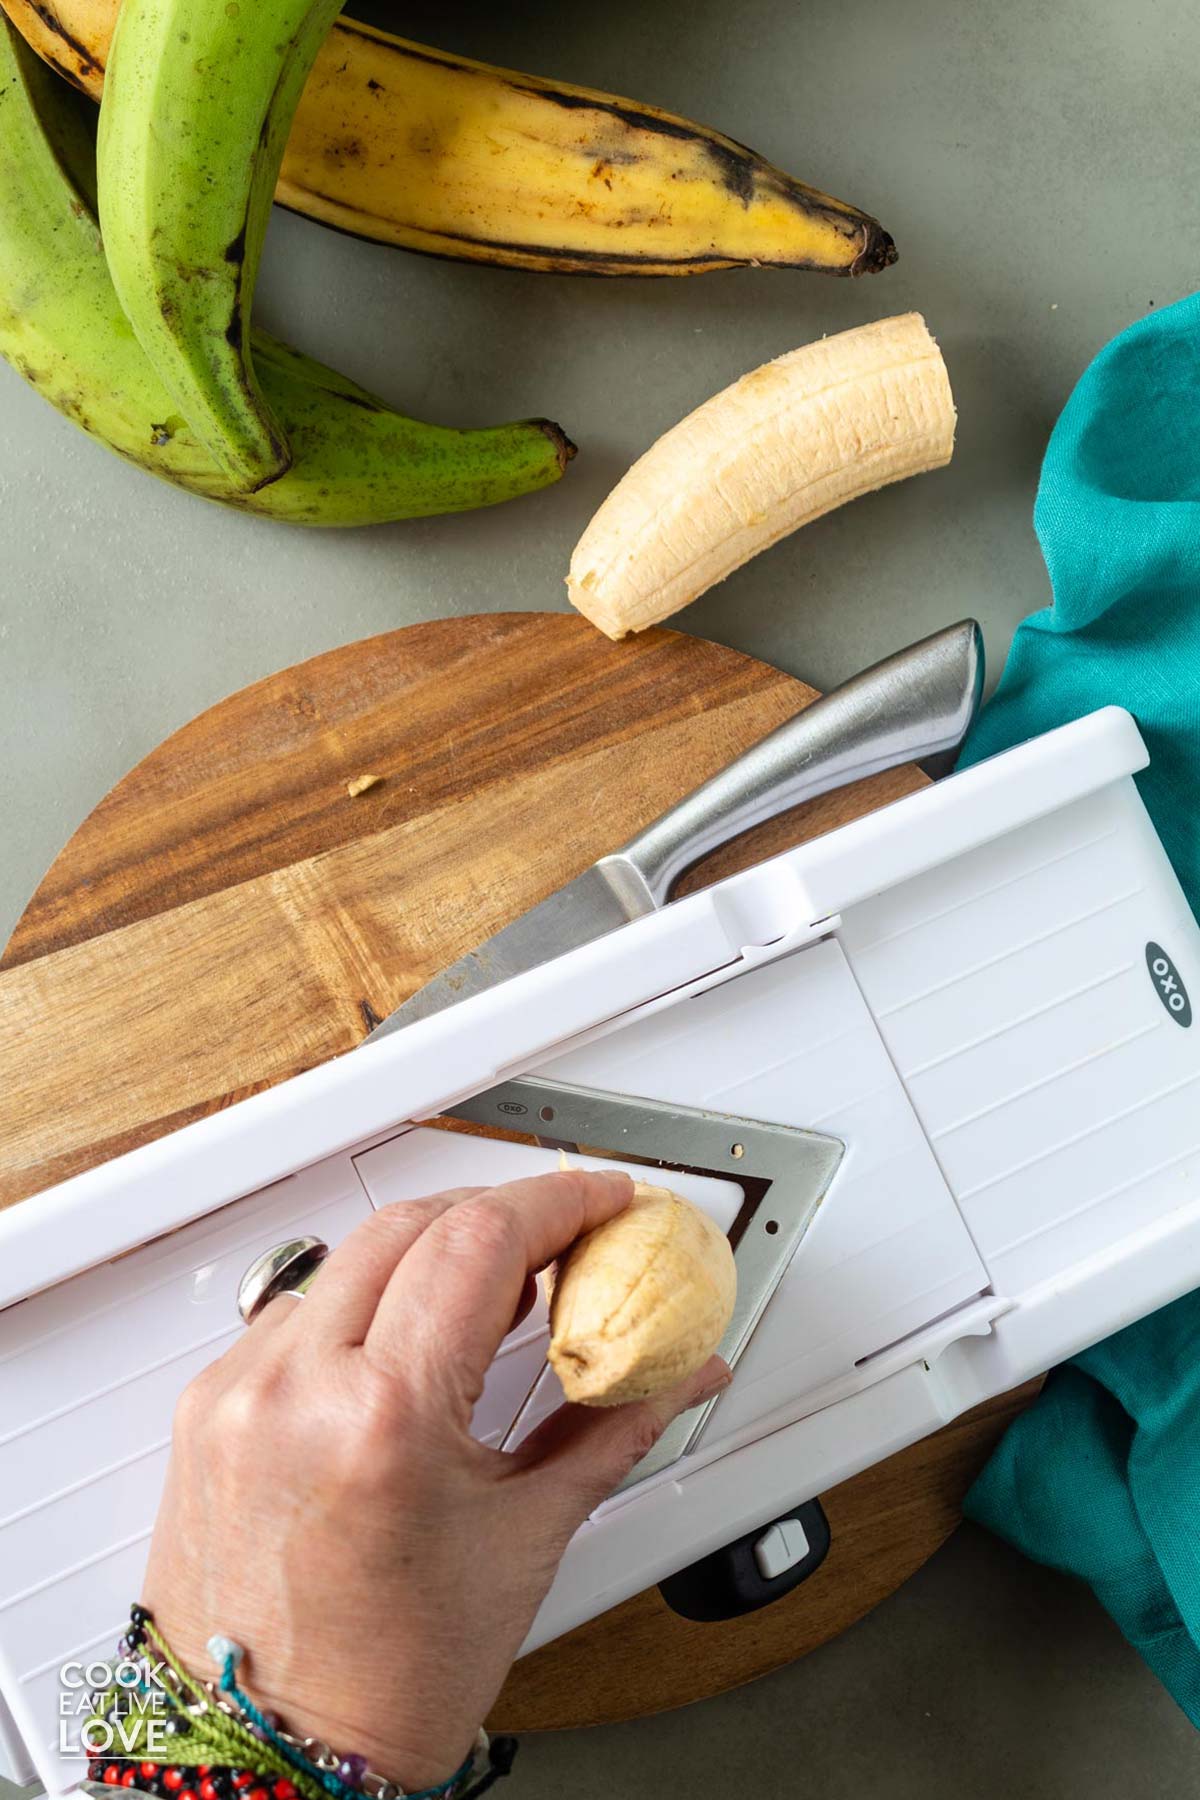 Using a mandolin slicer to cut the plantain.